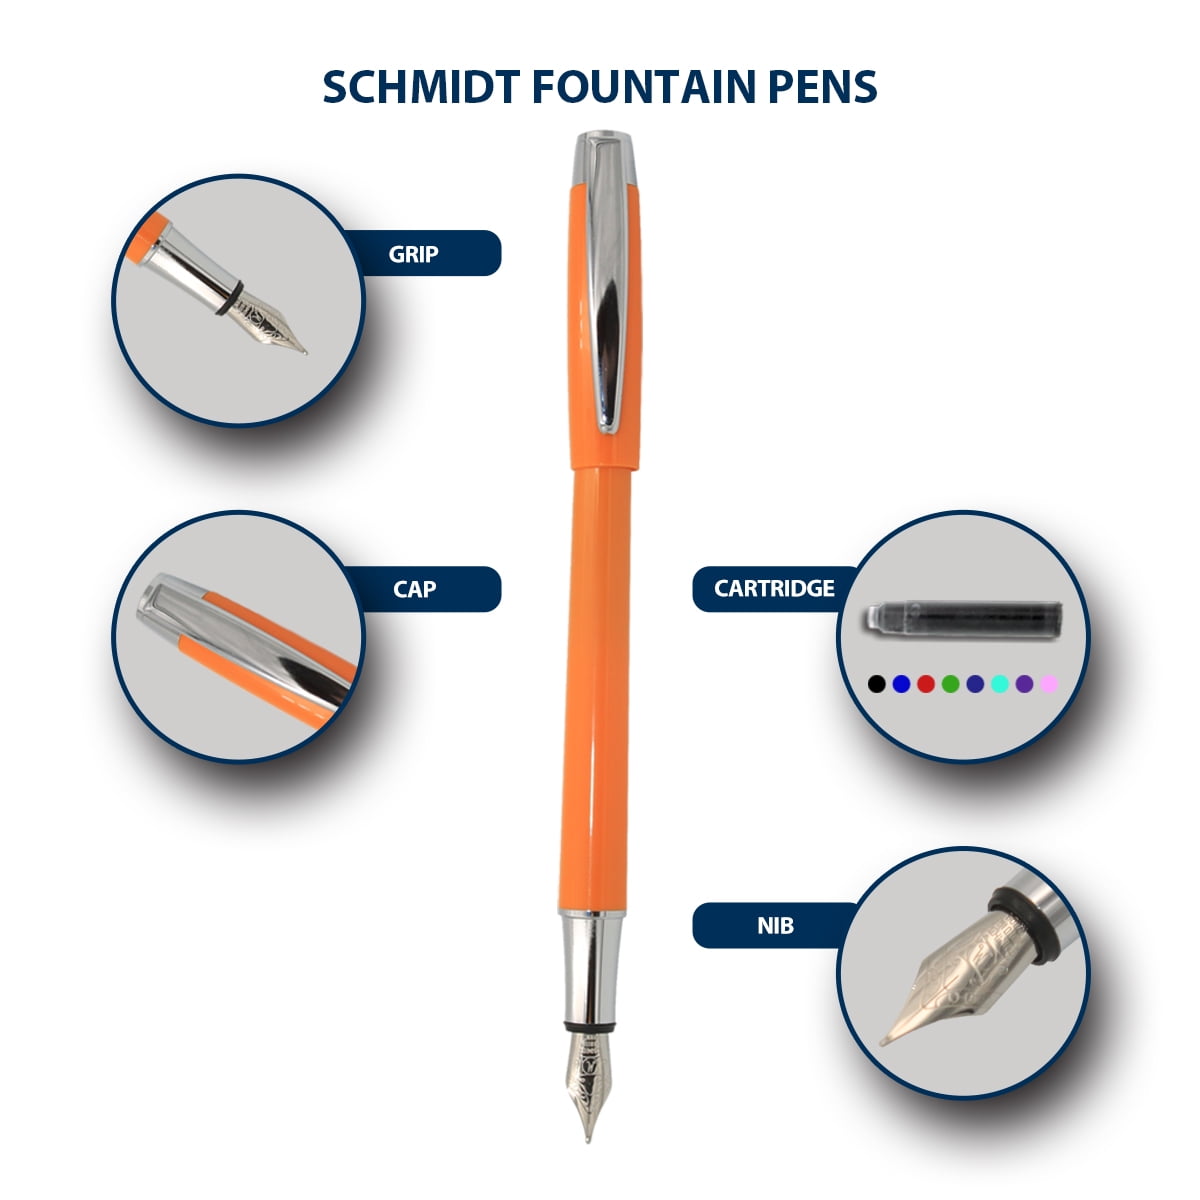 Introducing the NEW WD-40® Precision Pen: Precision in Your Pocket, for Any  Project 